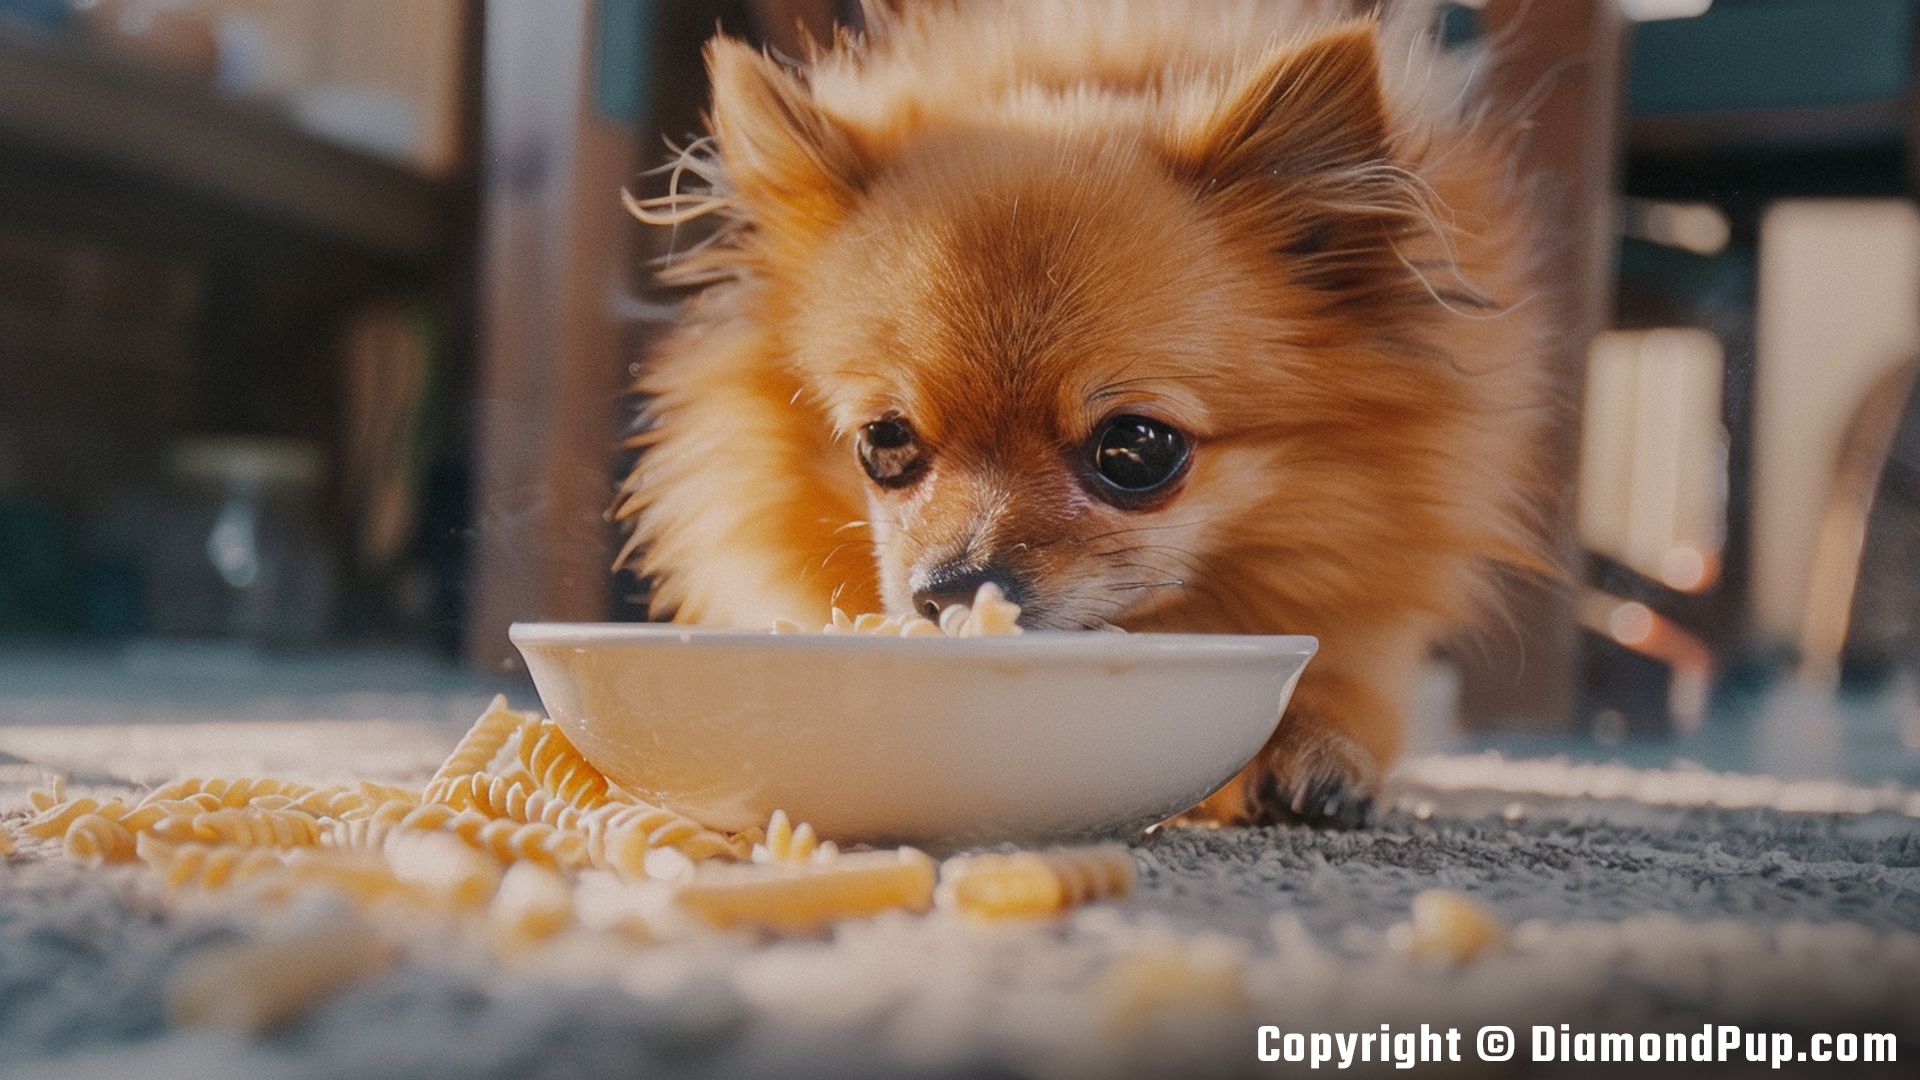 Image of an Adorable Pomeranian Snacking on Pasta